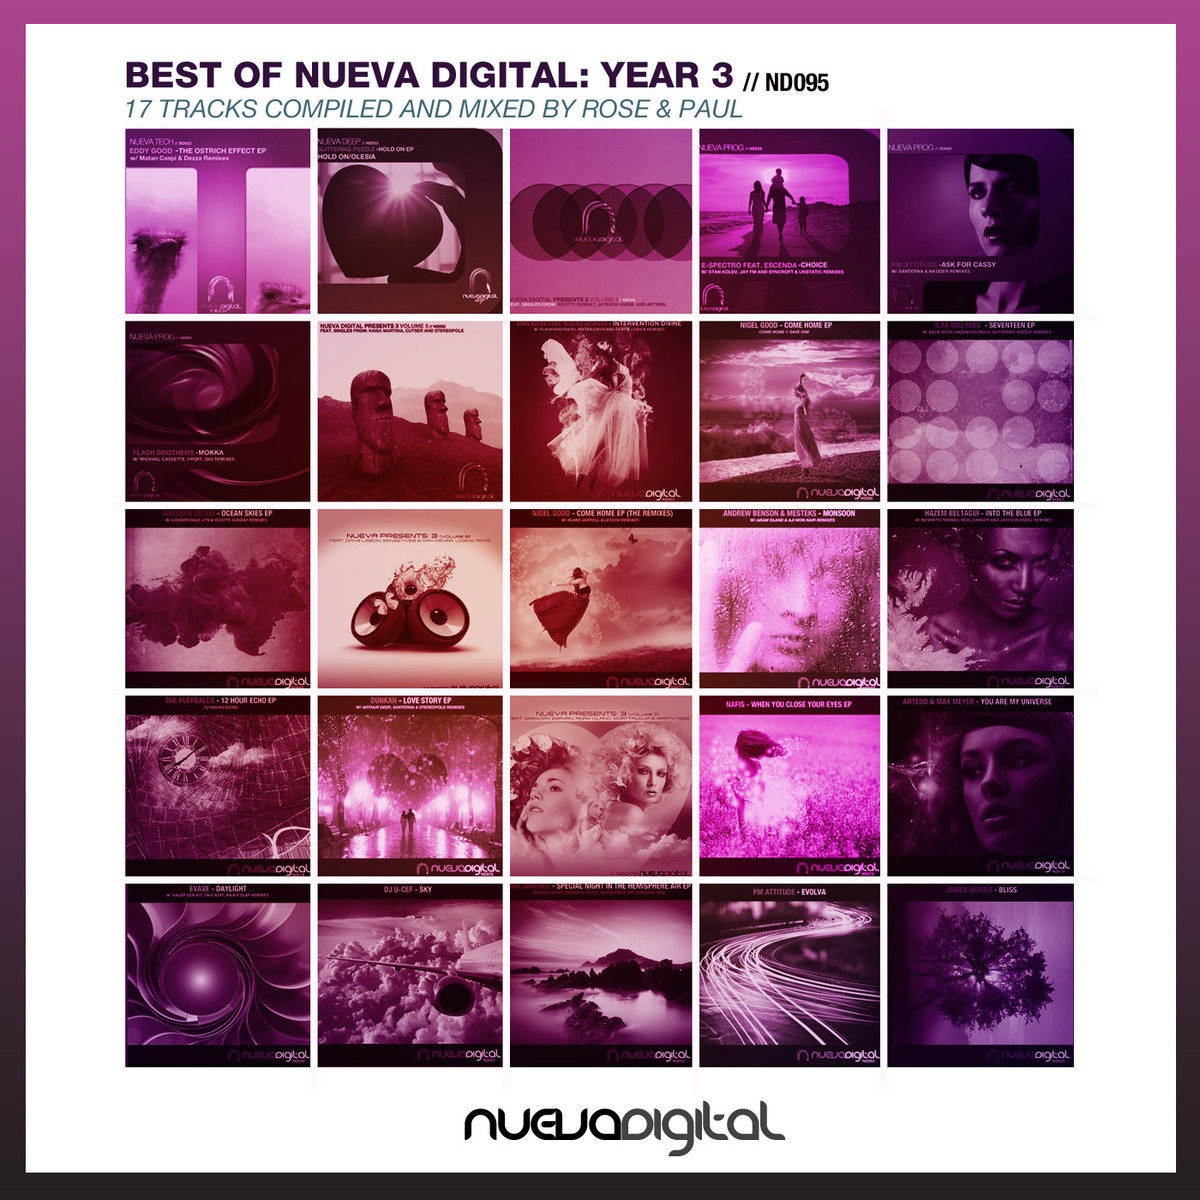 Nueva pres. Year 3 Mixed & Compiled By Rose & Paul (Continous DJ Mix)